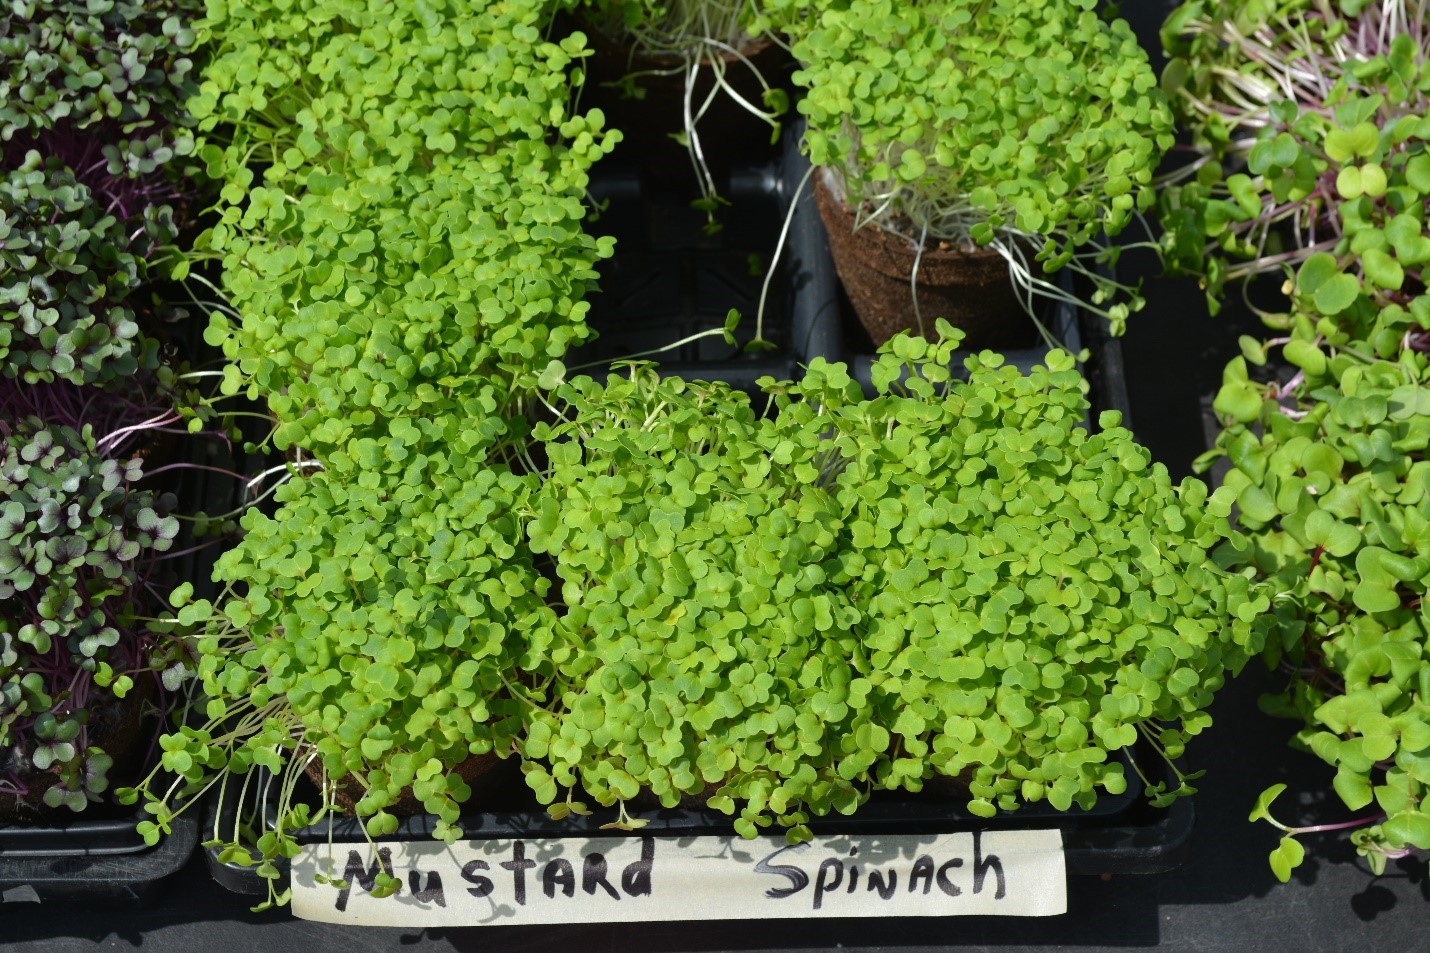 Overhead view of mustard spinach plants